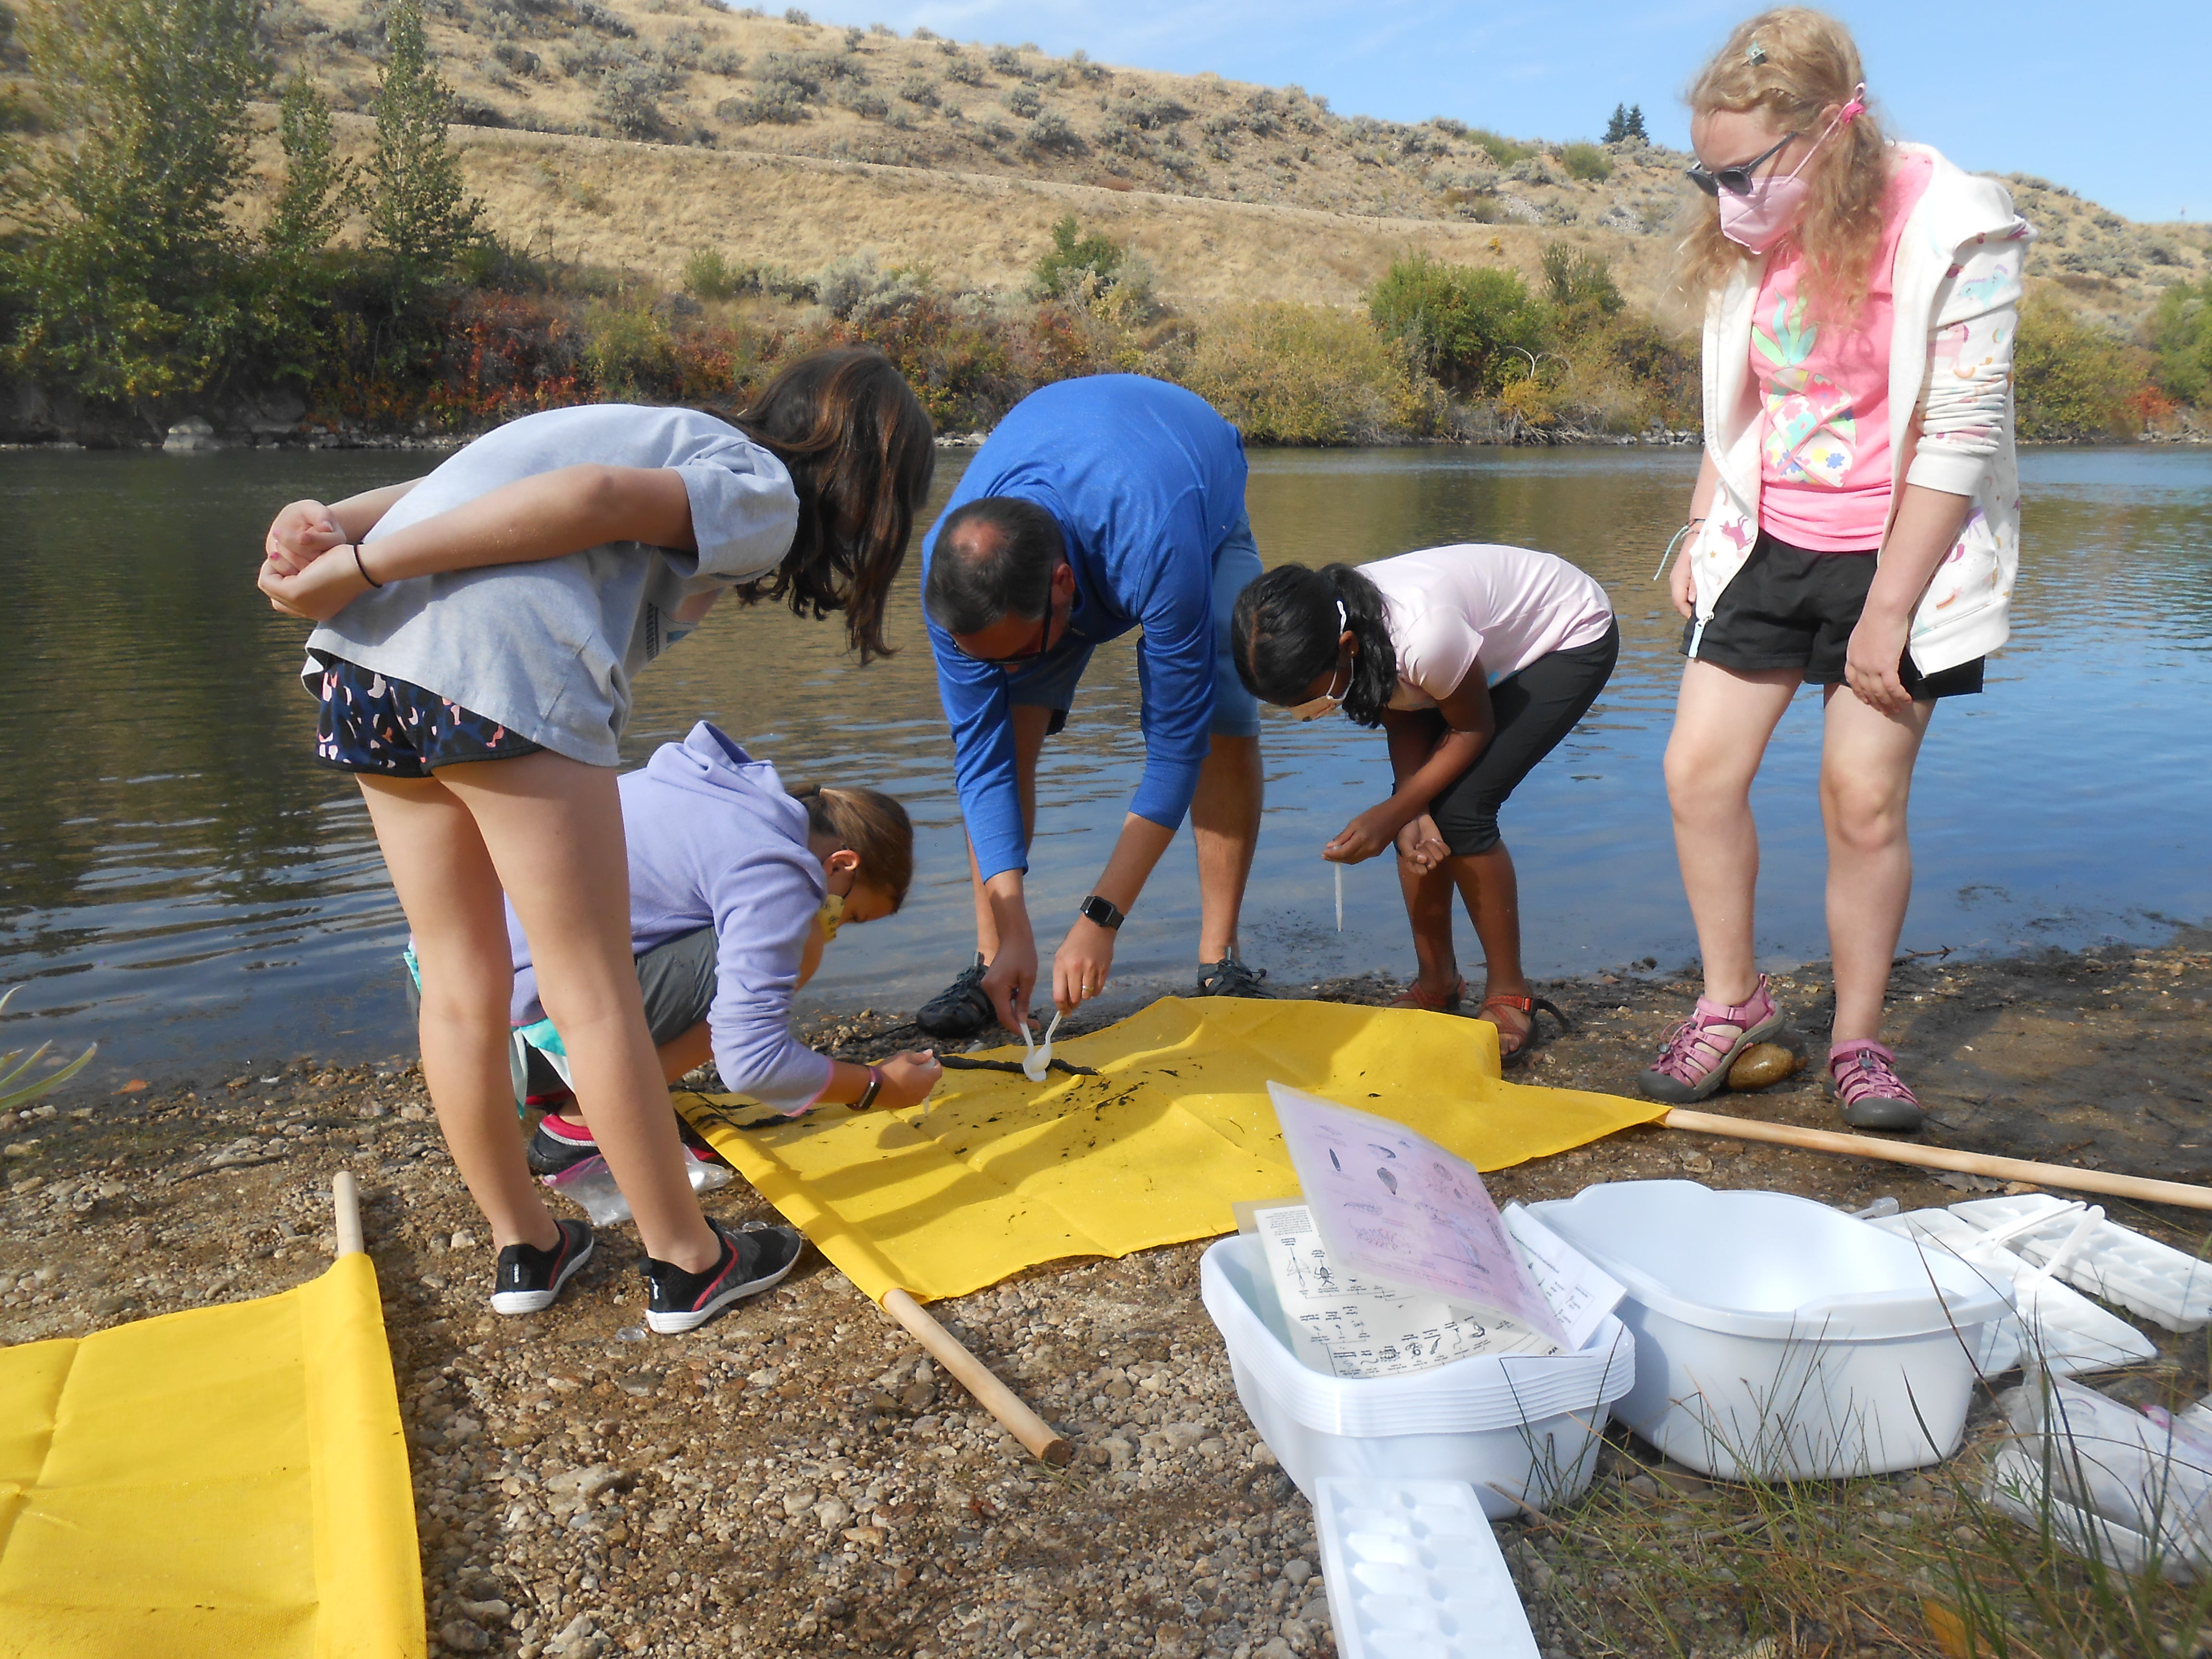 a teacher and four students stand on the river bank. They stoop to look closely at a yellow tarp that has mud and debris spread on it